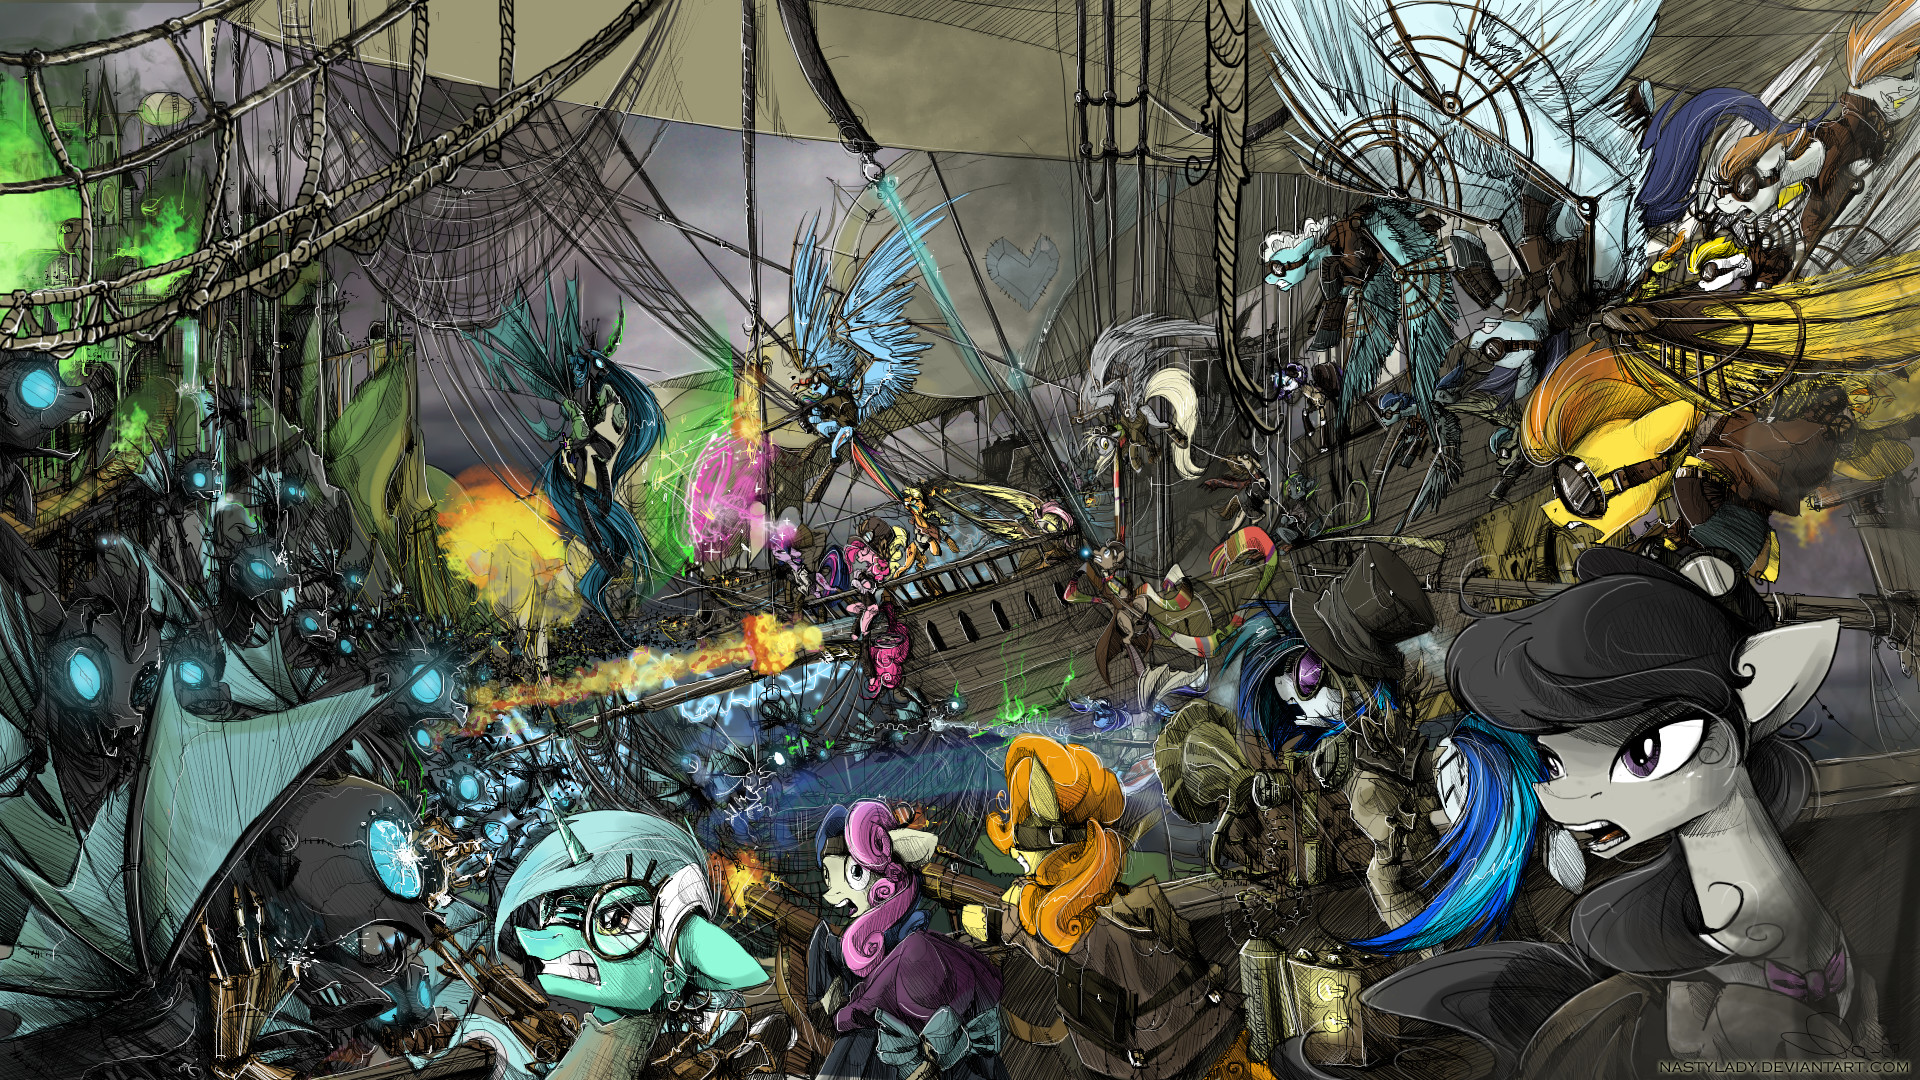 1920x1080 This is War by *NastyLady on deviantART. A Steampunk MLP mashup that is  awesome